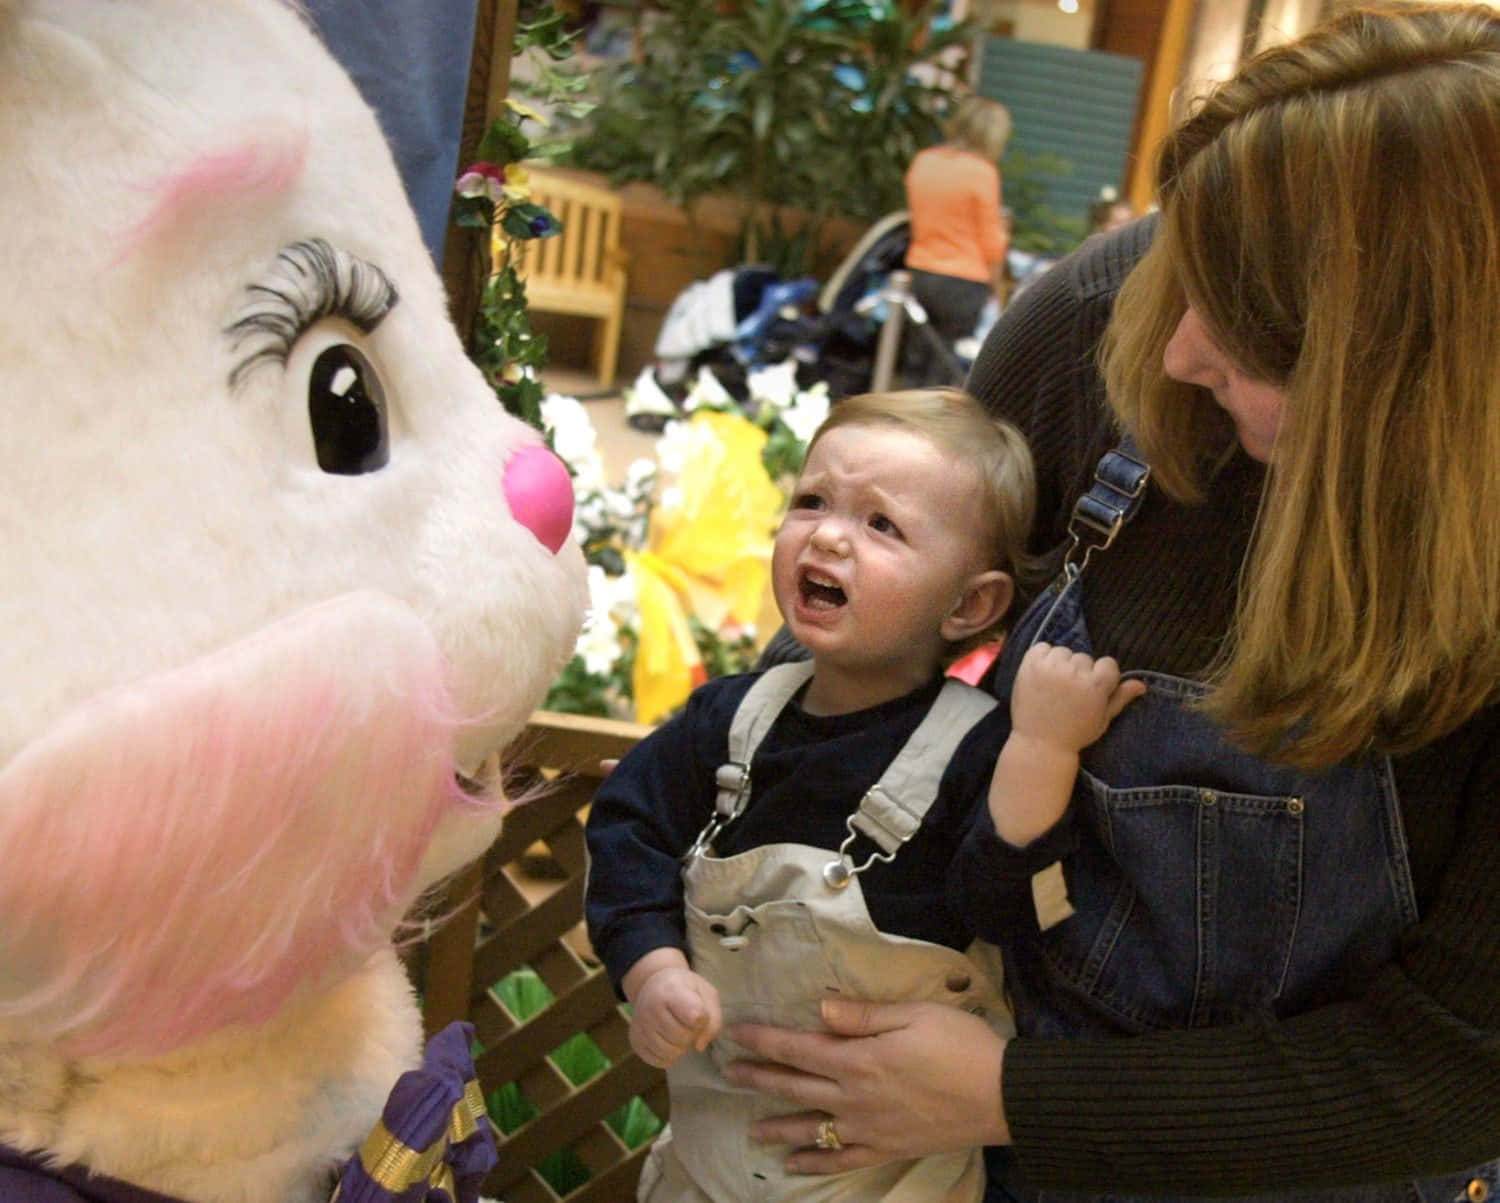 Prepare to be spooked by this Creepy Easter Bunny!